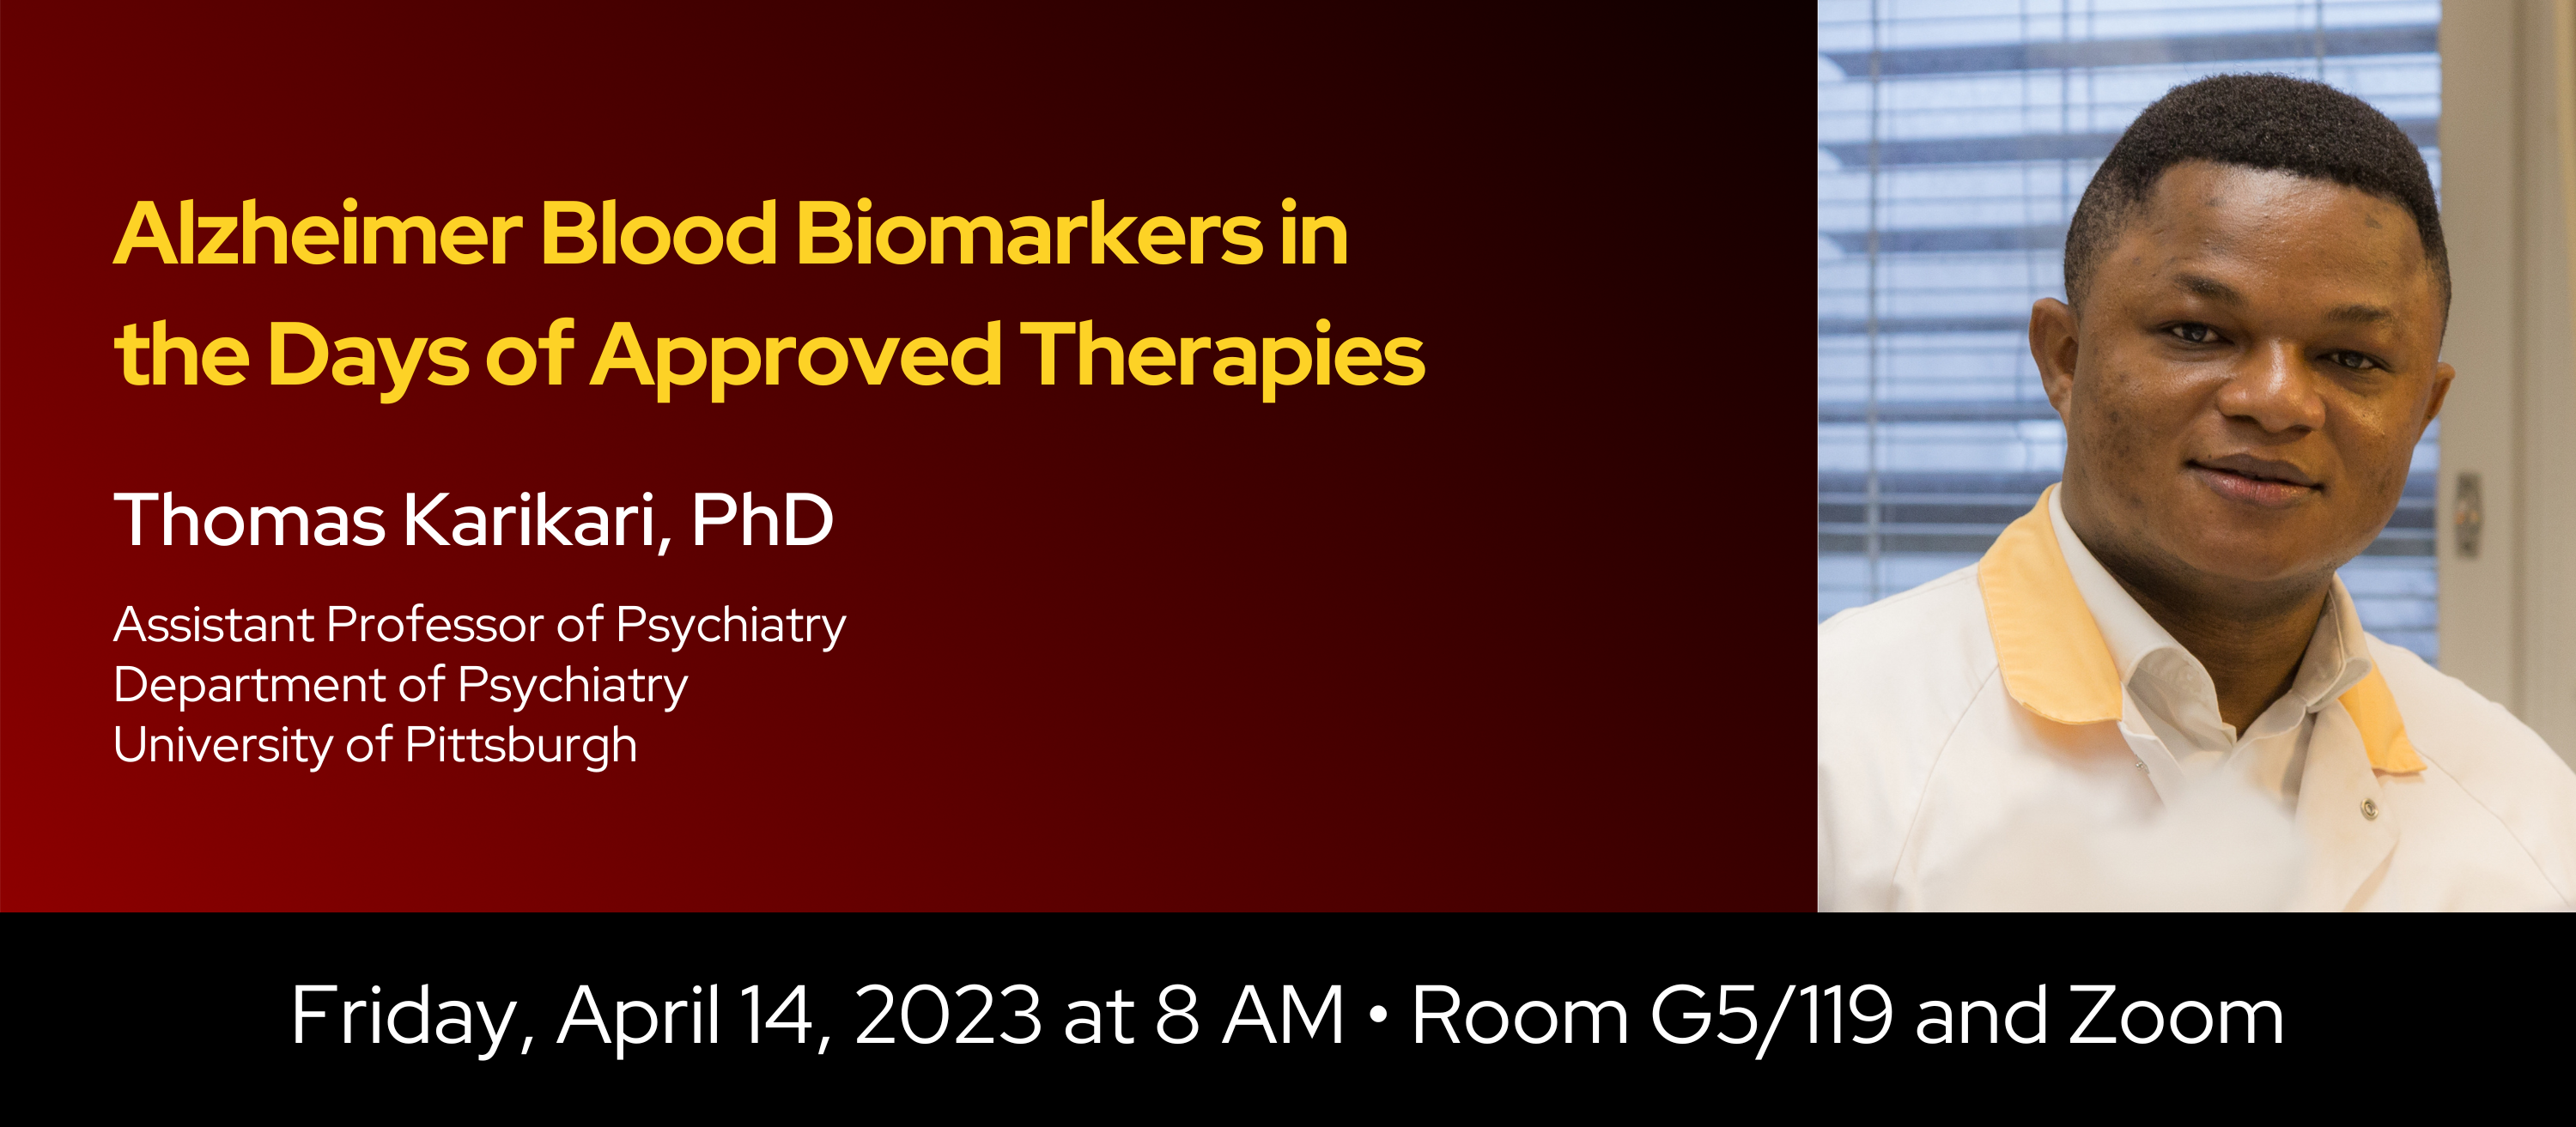 Title: Alzheimer Blood Biomarkers in the Days of Approved Therapies